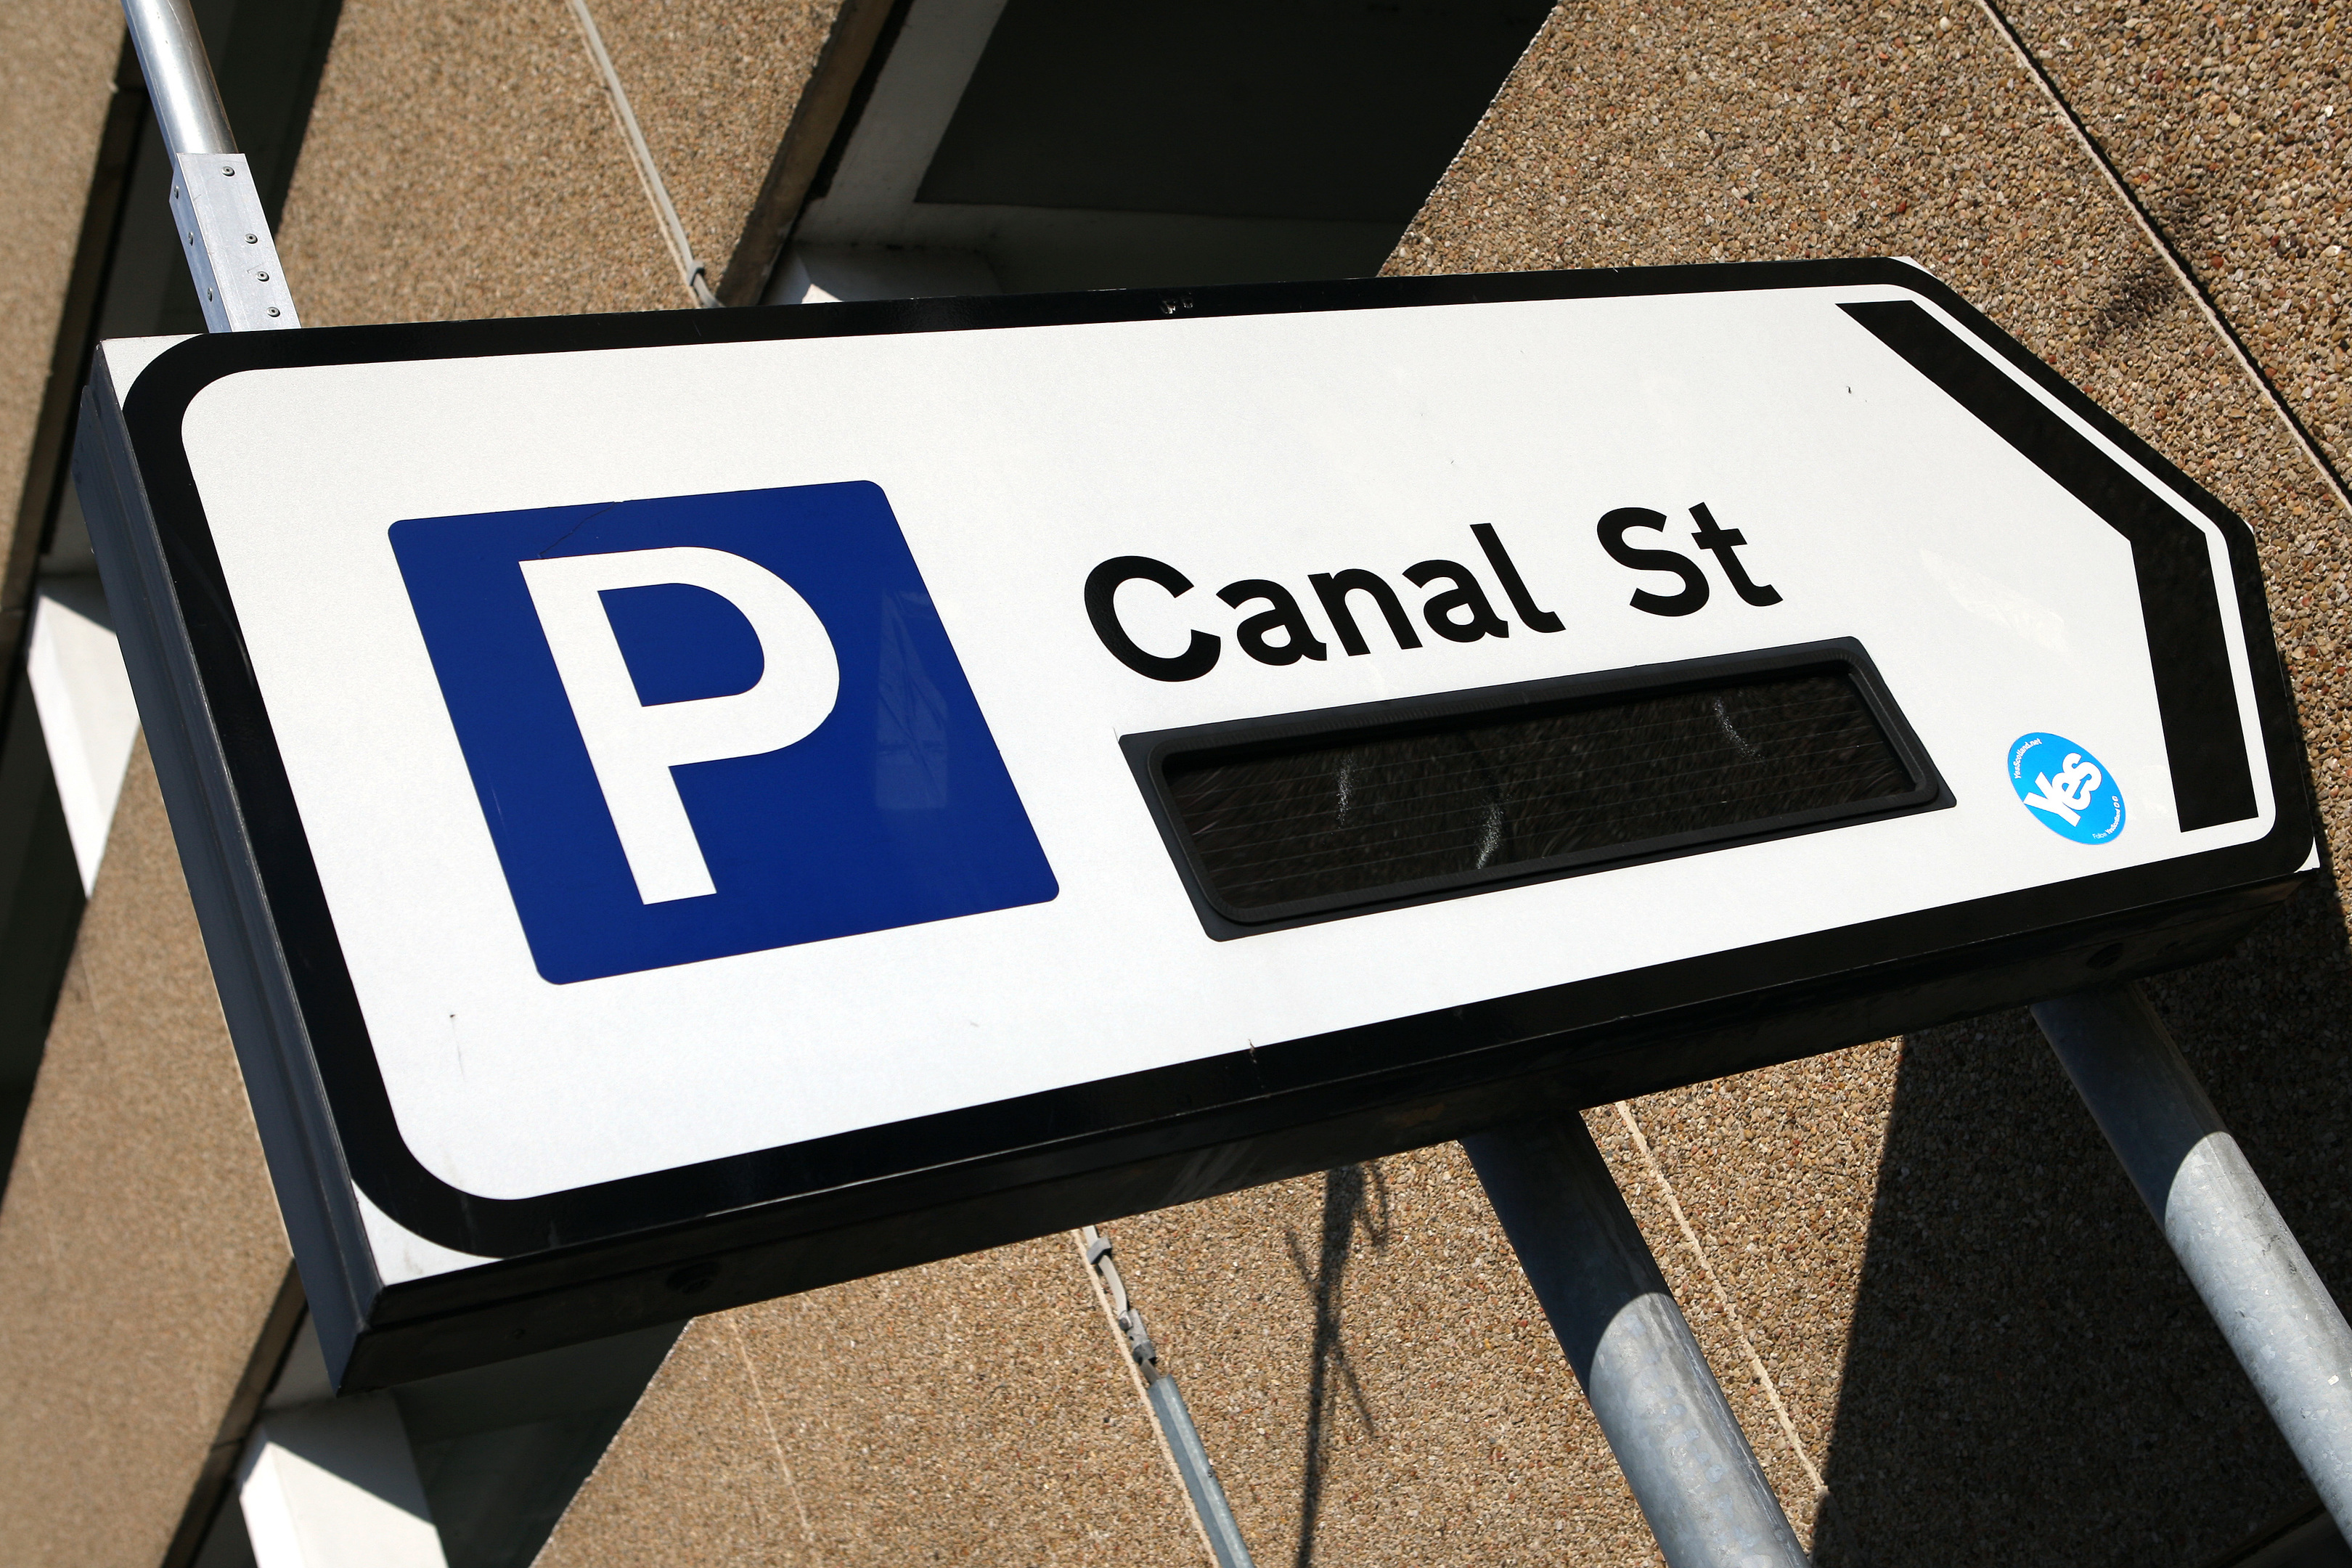 The £1.5 million Canal Street car park upgrade could begin in the coming weeks.